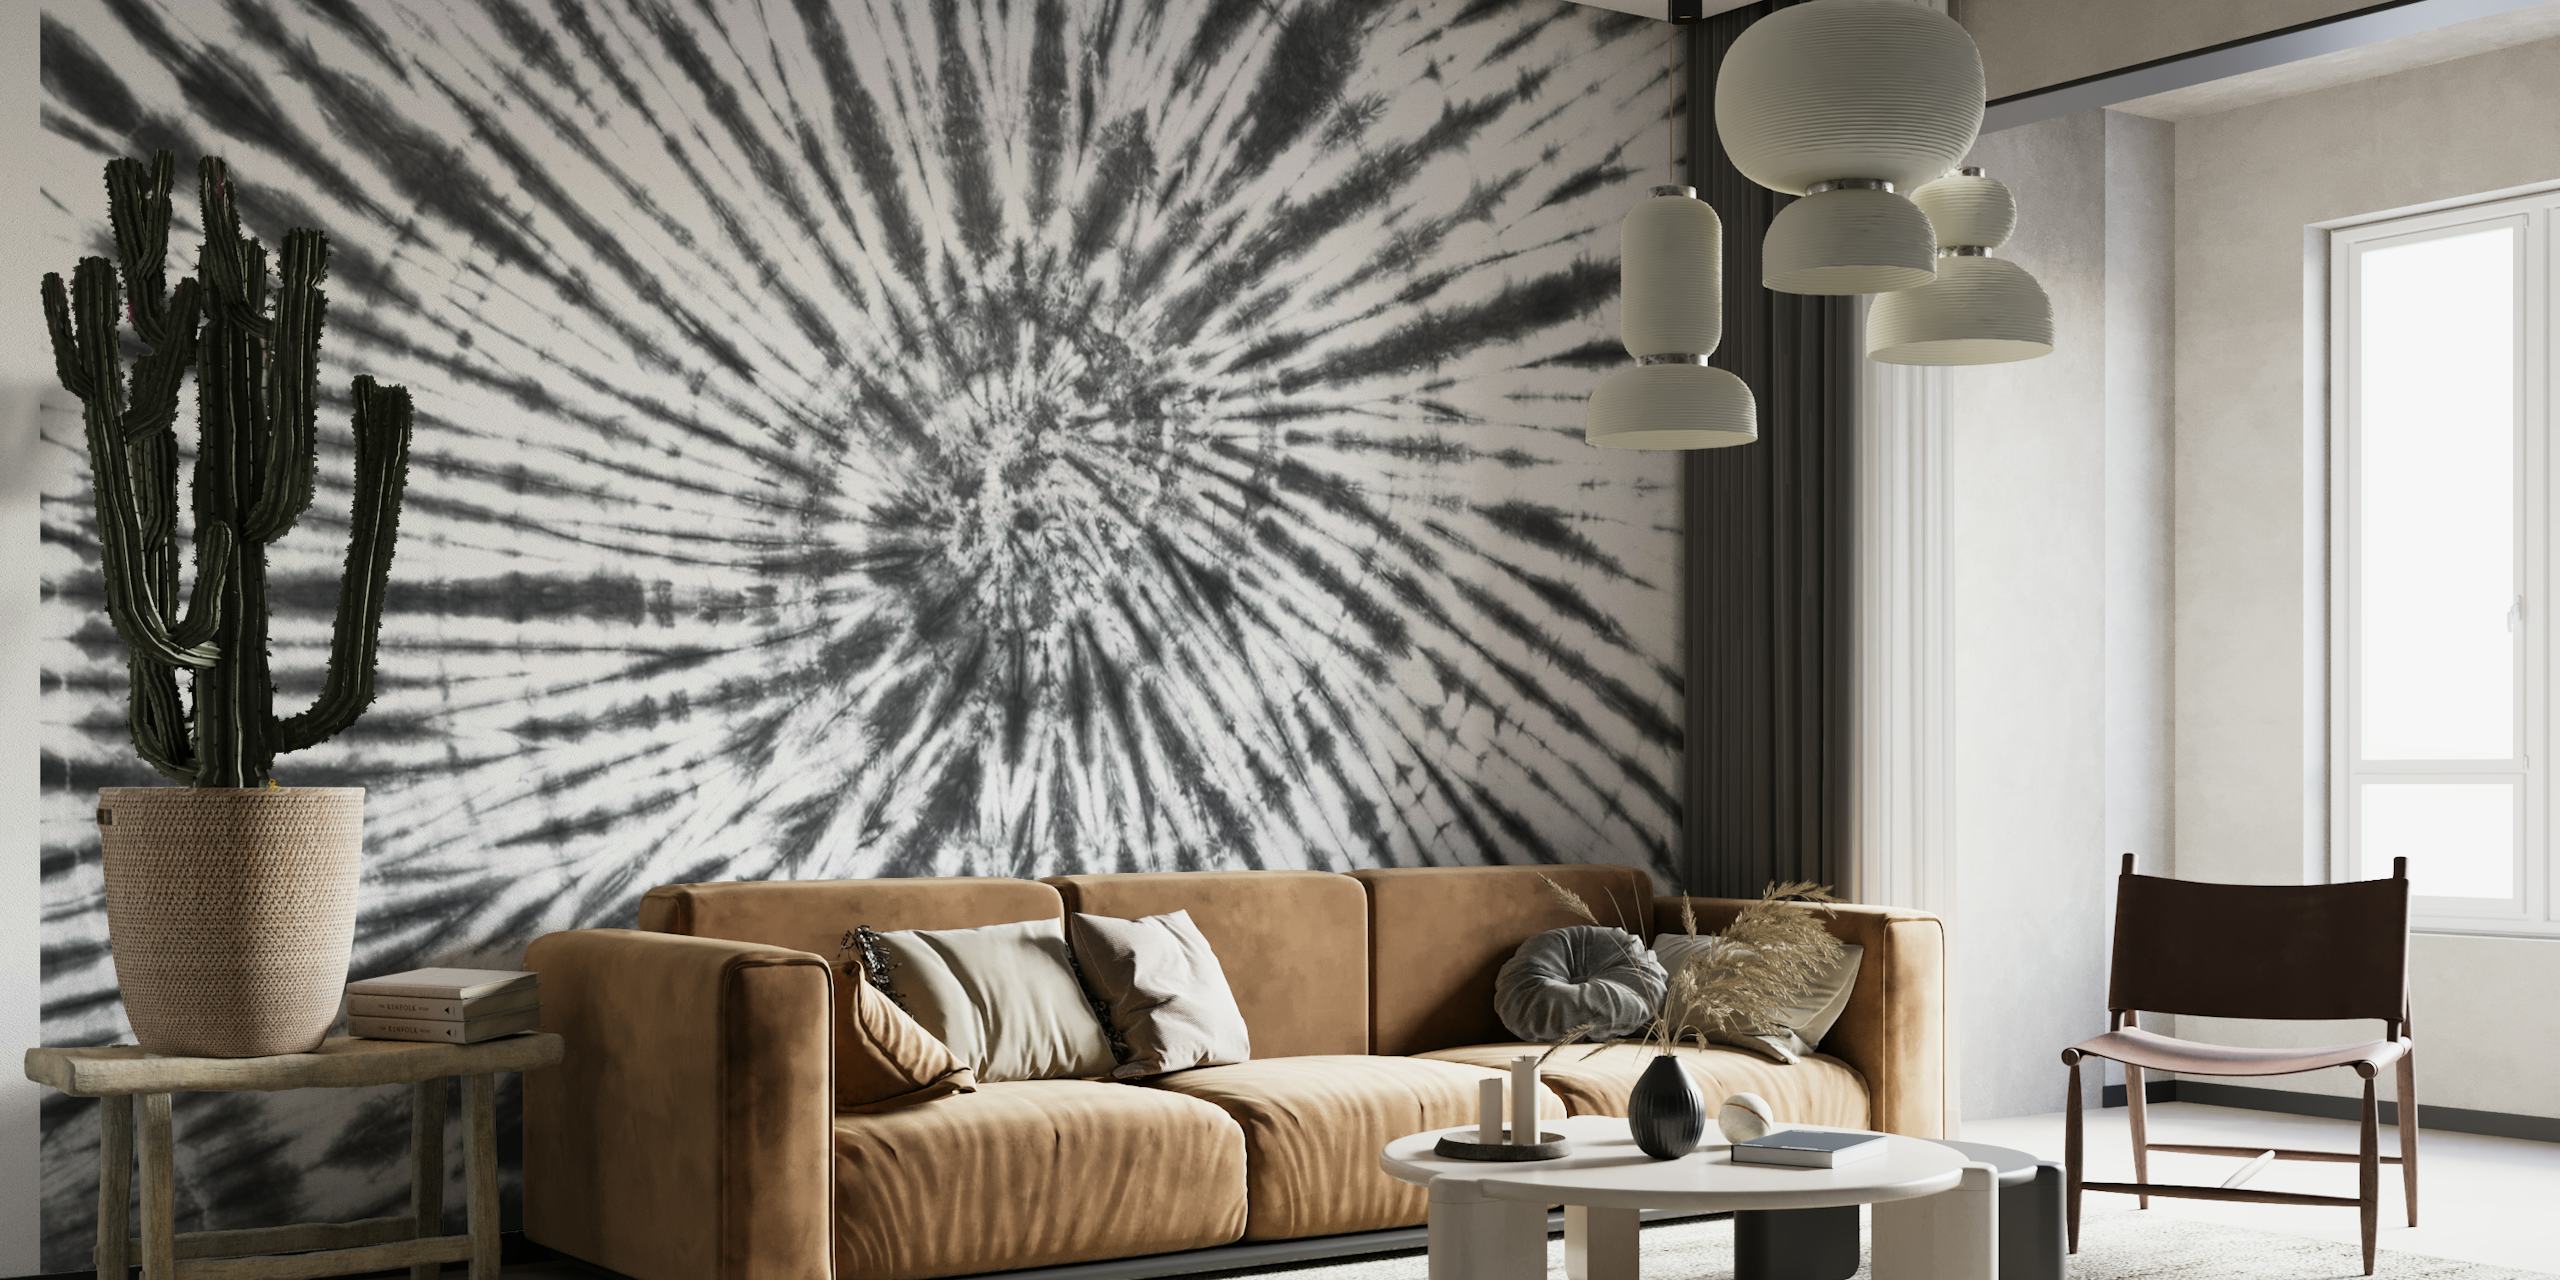 Black and white tie dye pattern wall mural